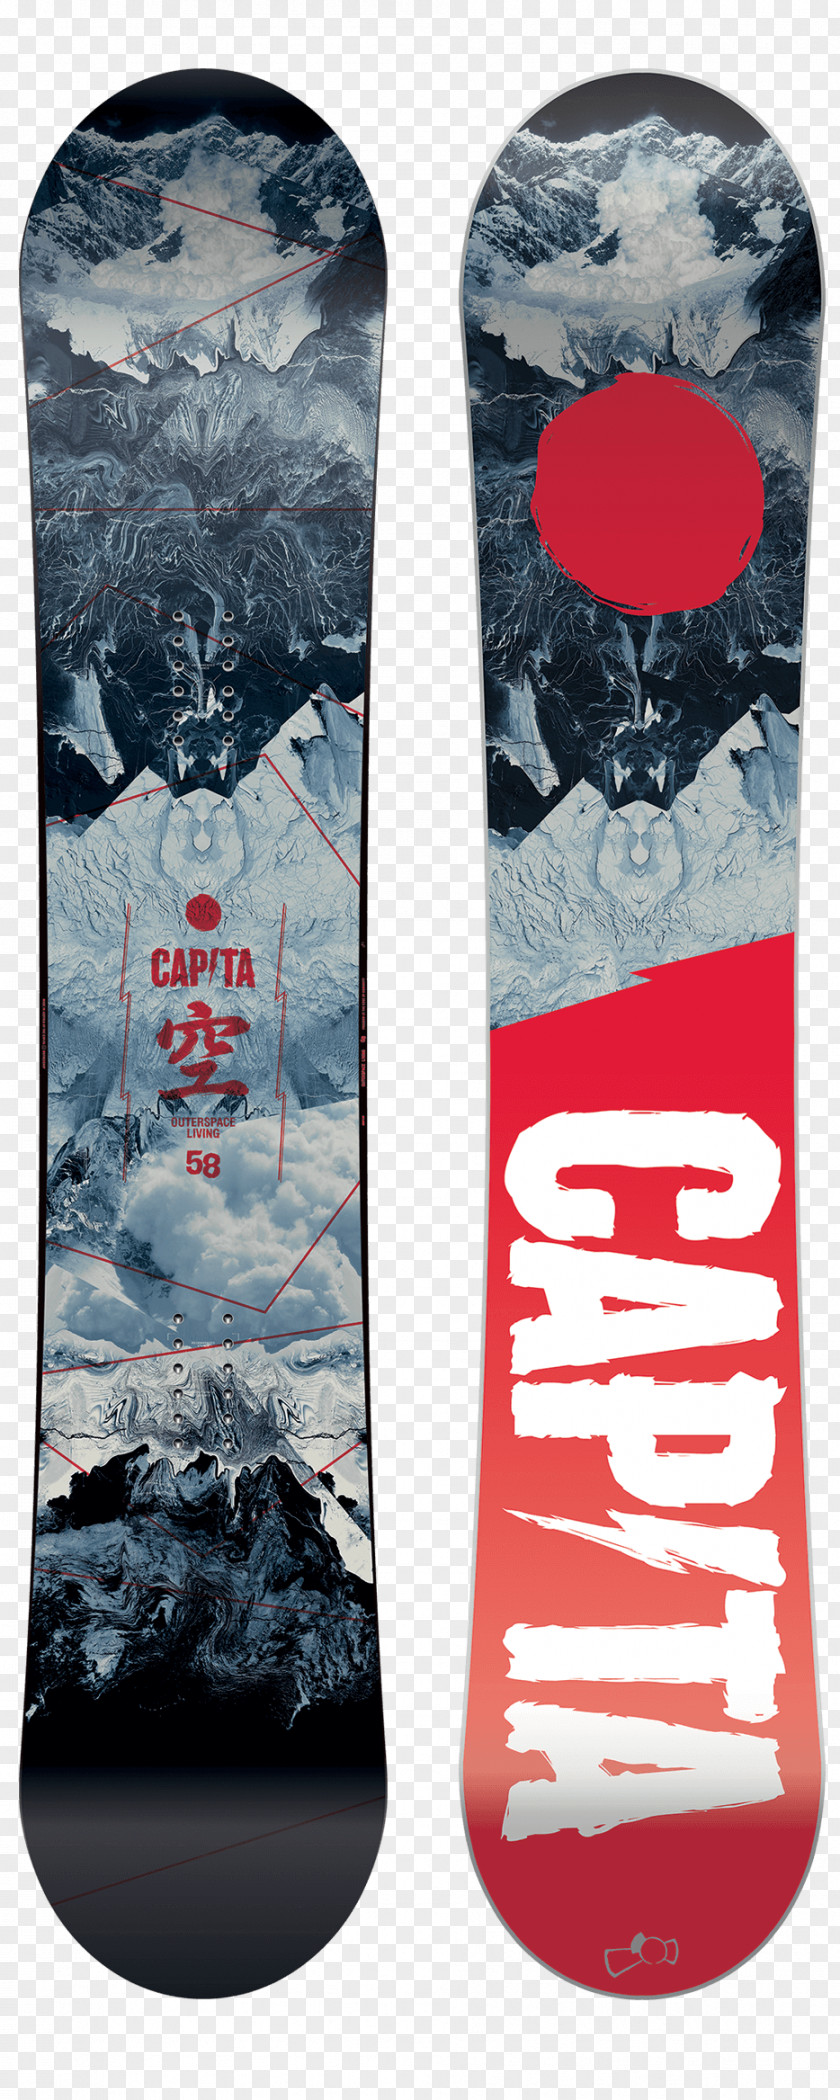 Outer Space Burton Snowboards Capita Sporting Goods Product Lining PNG